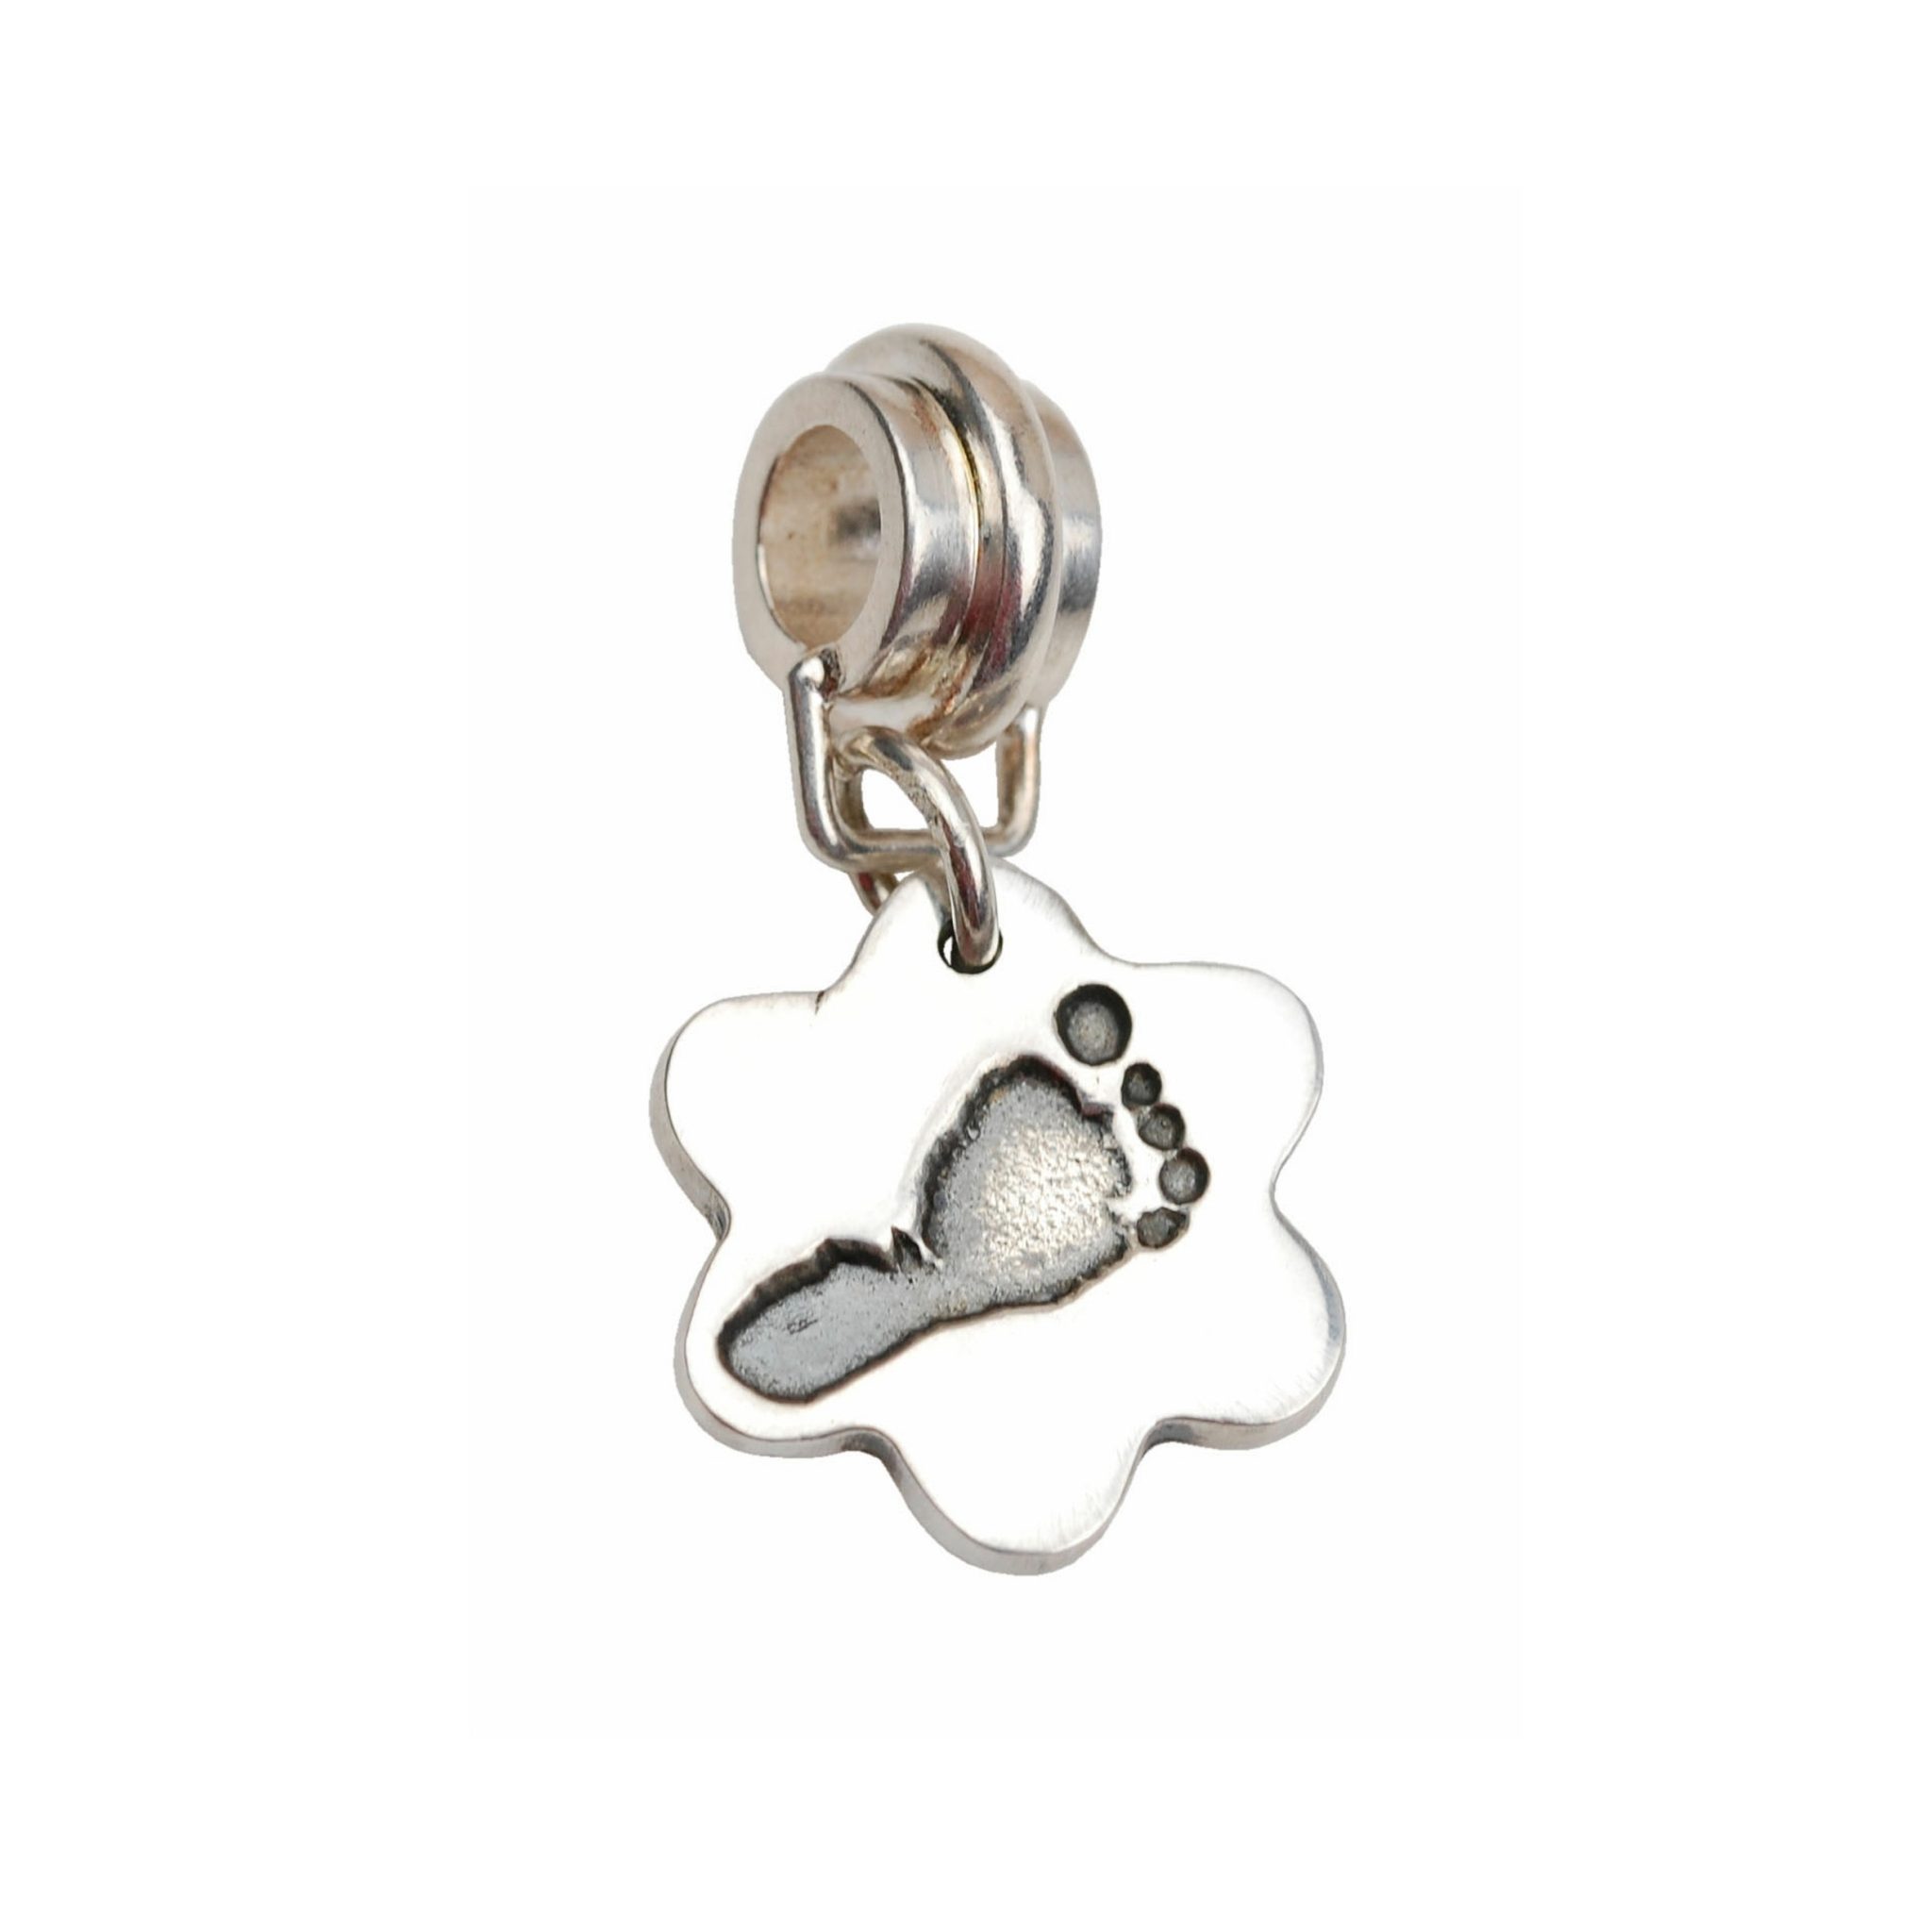 Silver flower footprint charm with charm carrier